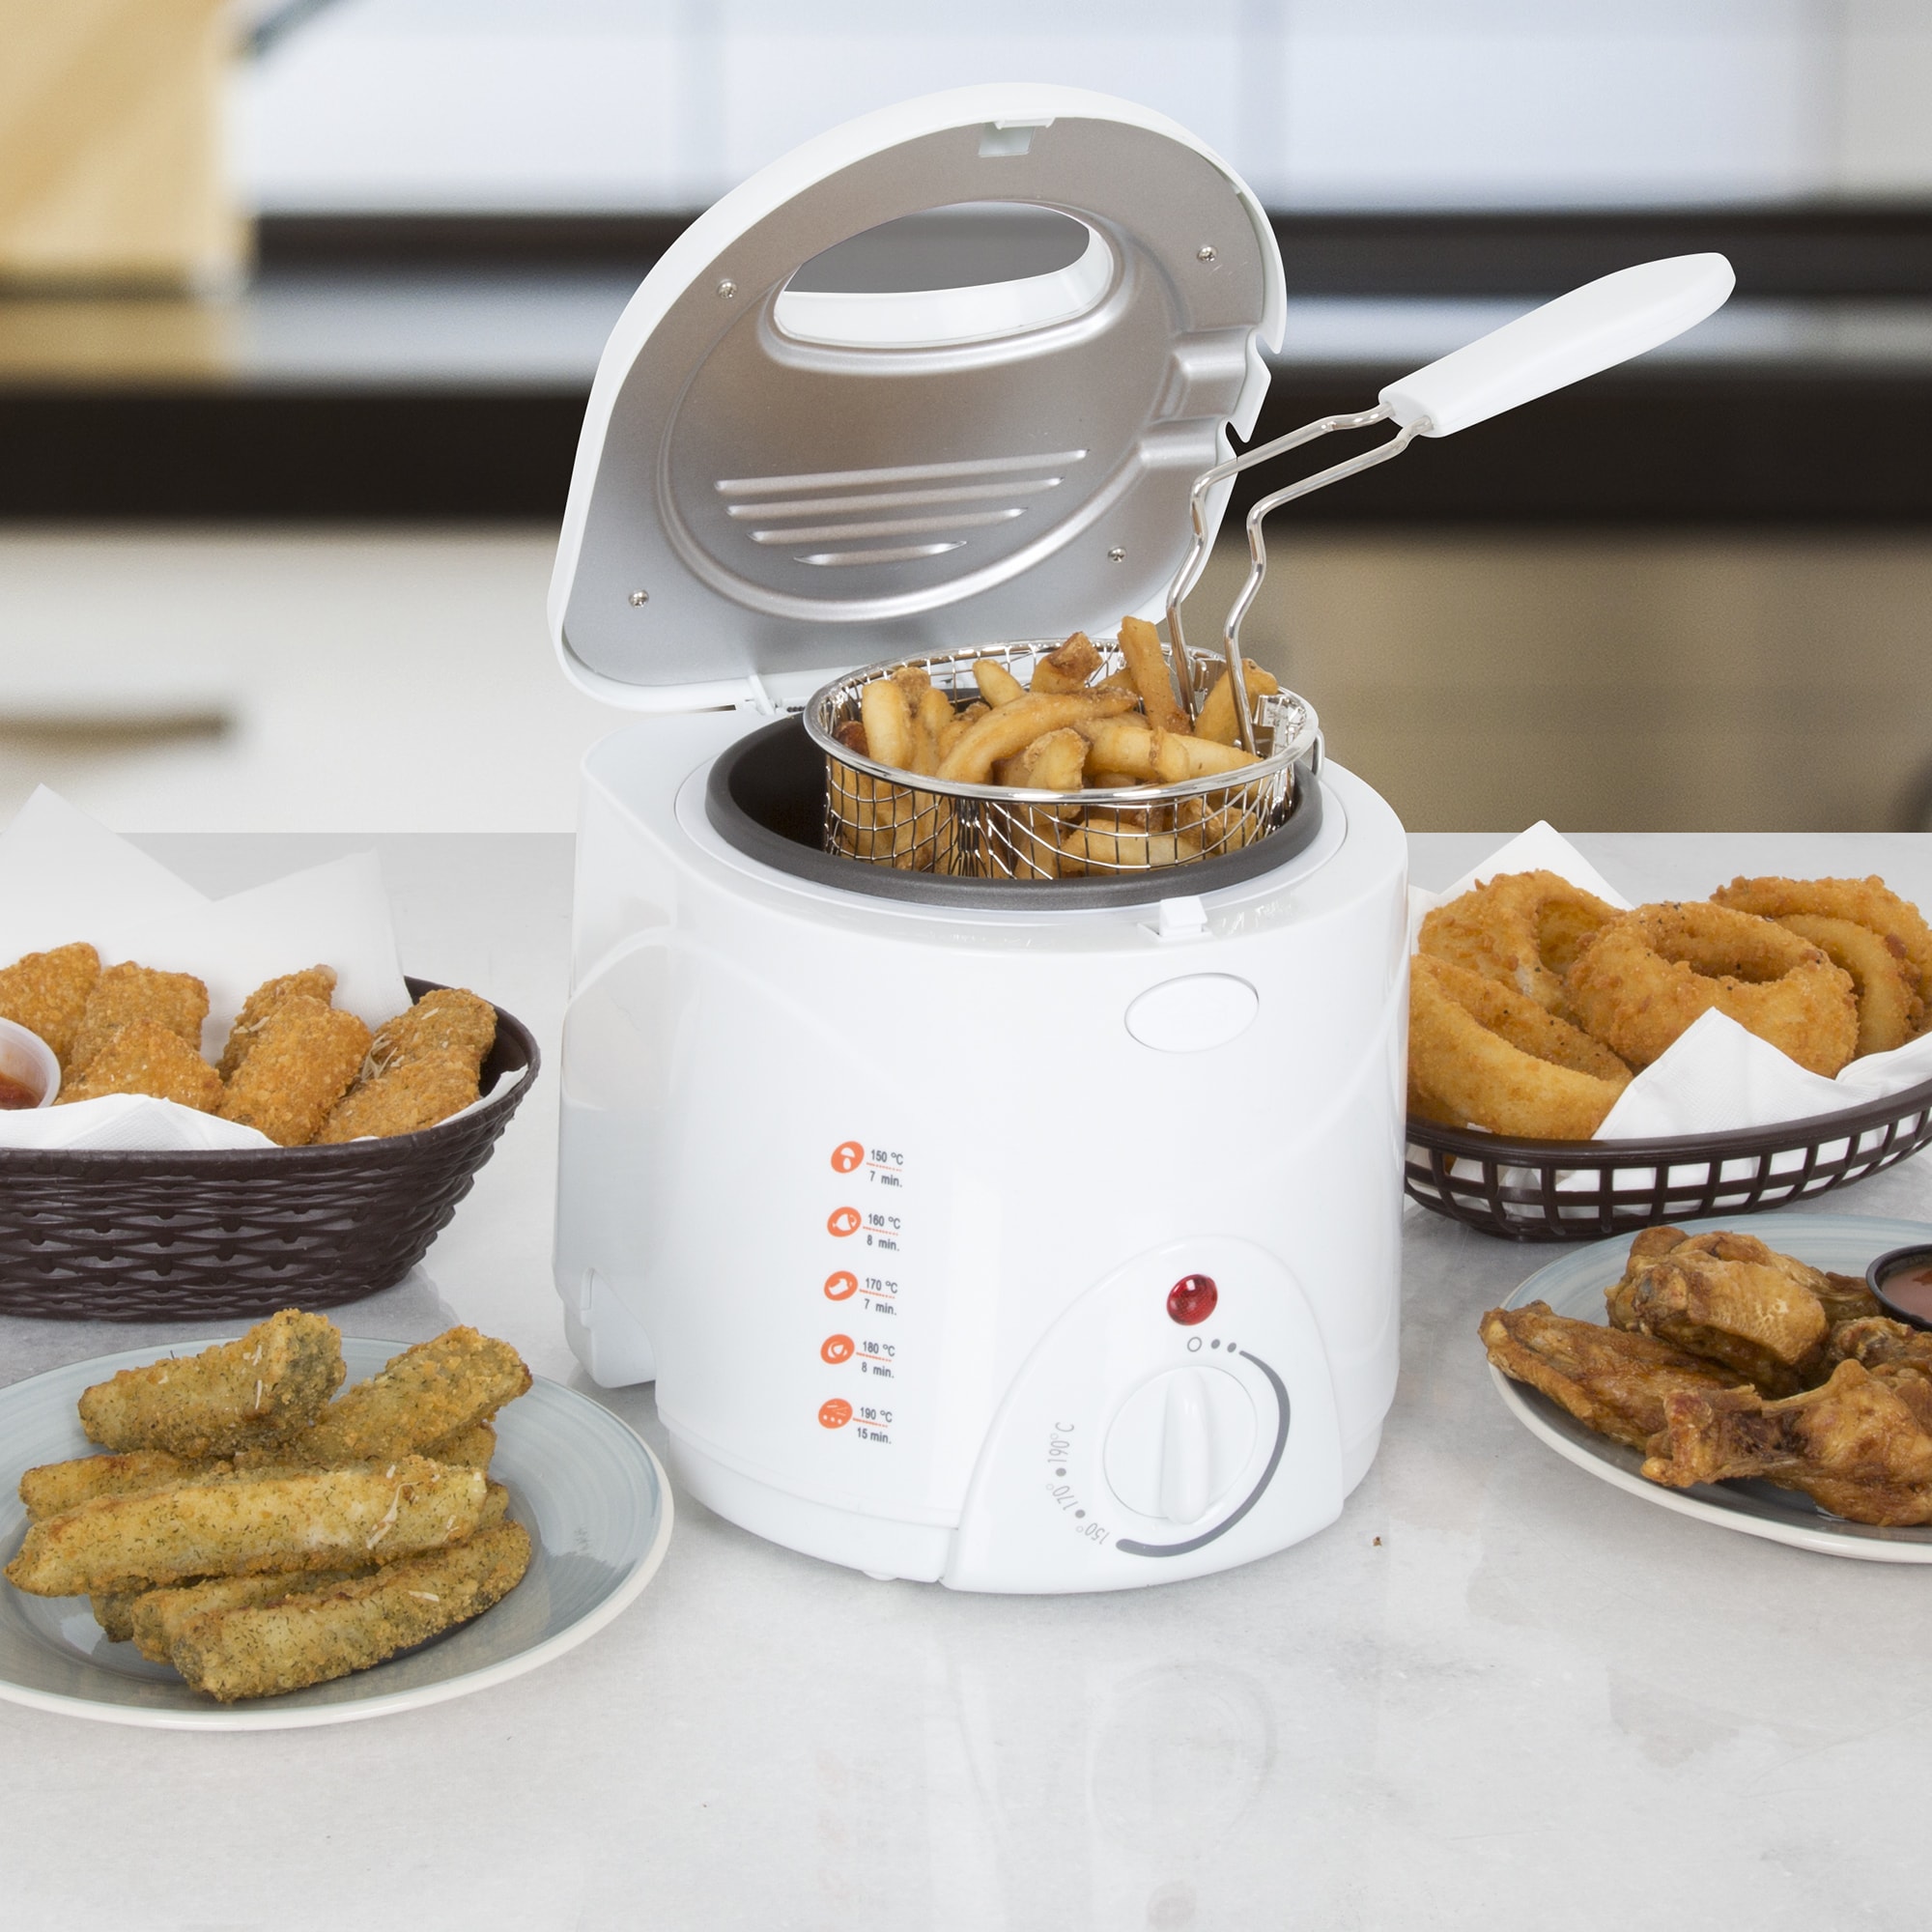 https://ak1.ostkcdn.com/images/products/11883507/Classic-Cuisine-Cool-Touch-1-Liter-Deep-Fryer-with-Wire-Fry-Basket-bbd61a86-d5c5-40c0-850c-e2f1a21ee274.jpg